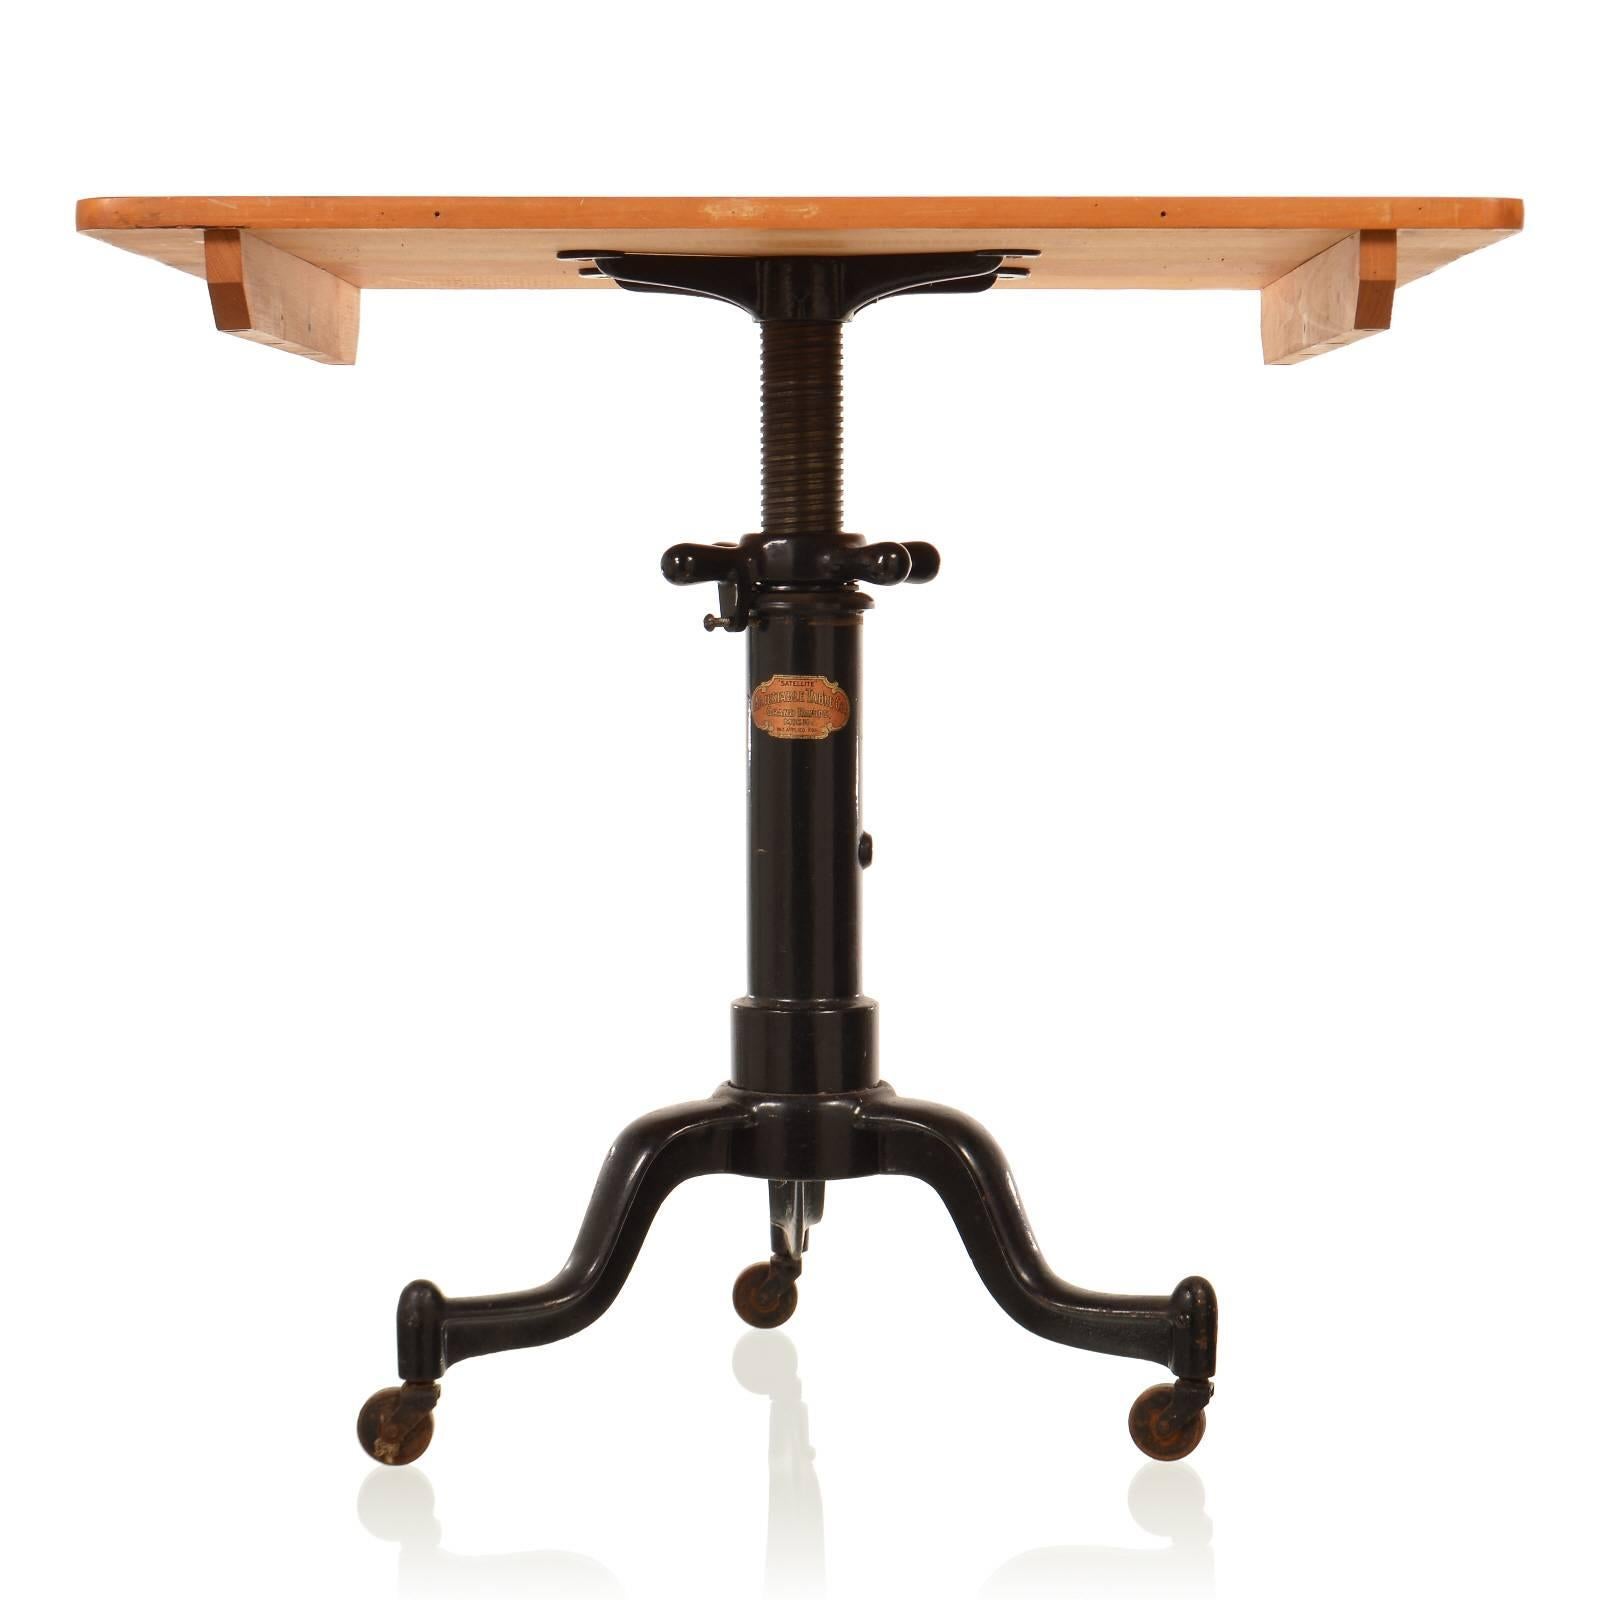 This is a marvelous antique table with a large flat groove screw base and tripod legs on steel casters. Made by the Adjustable Table Company of Grand Rapids, Michigan, this handsome 1890's industrial fixture was called the SATELLITE. Amazingly it